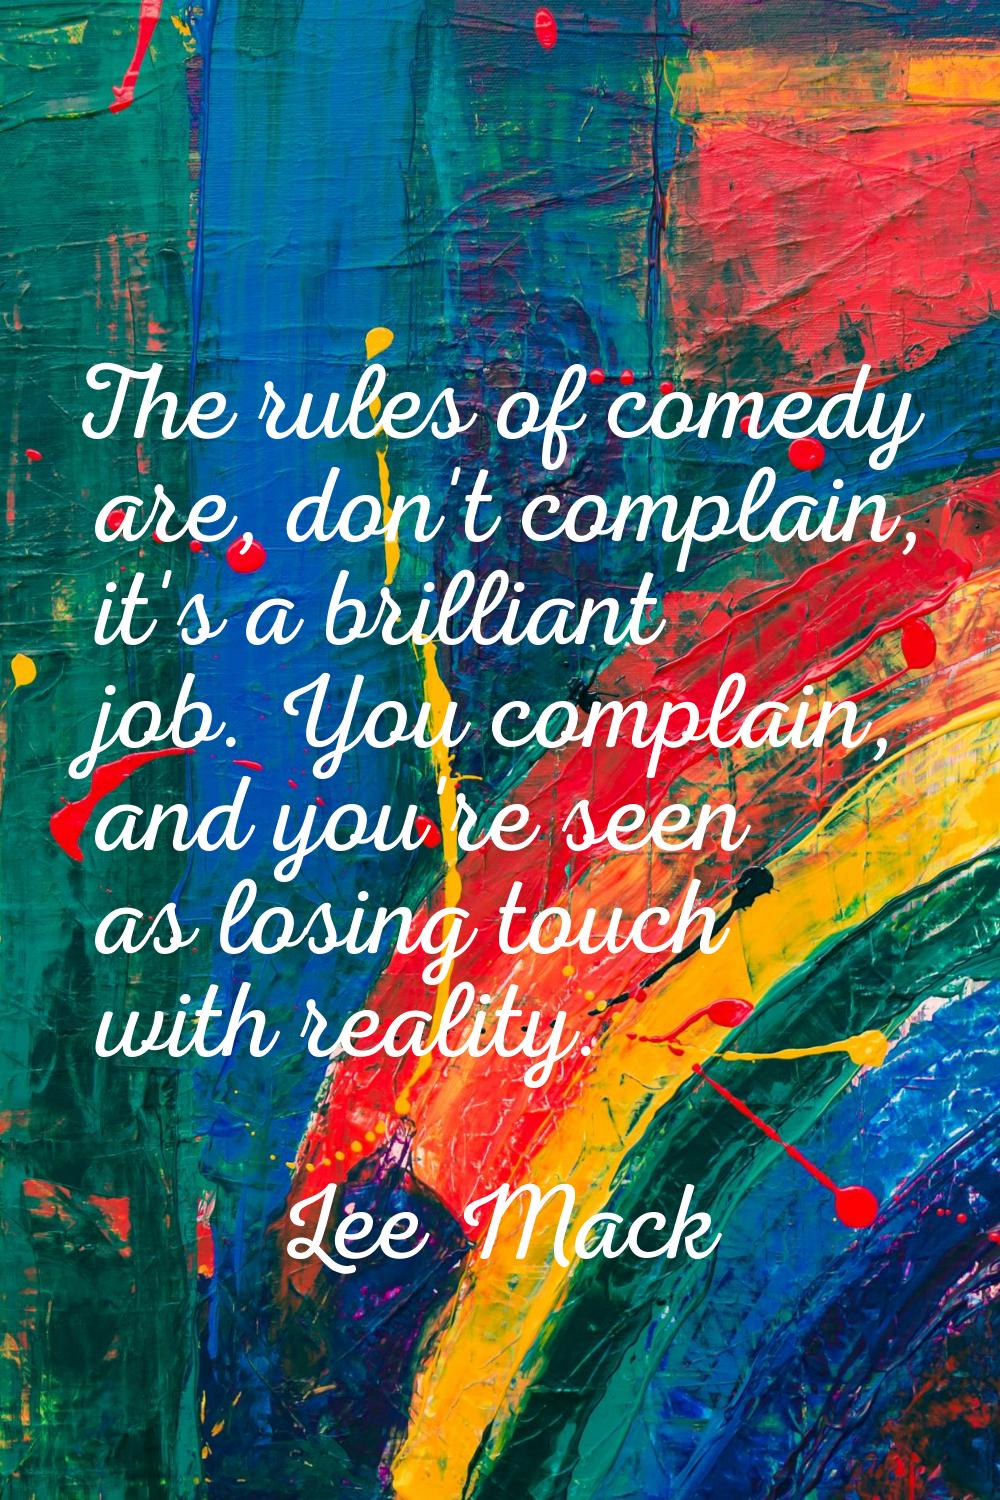 The rules of comedy are, don't complain, it's a brilliant job. You complain, and you're seen as los